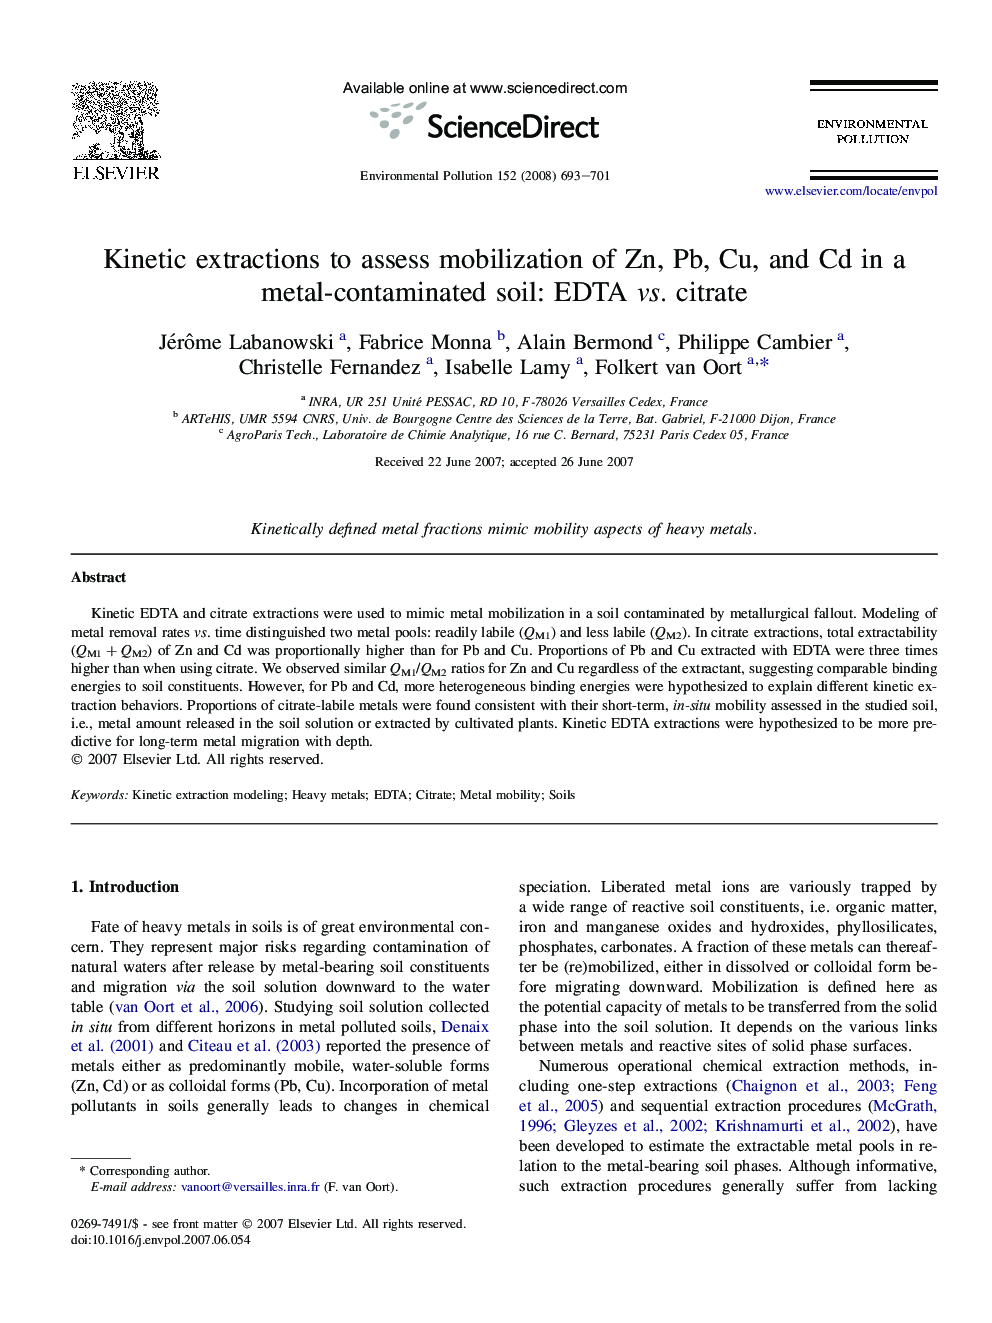 Kinetic extractions to assess mobilization of Zn, Pb, Cu, and Cd in a metal-contaminated soil: EDTA vs. citrate